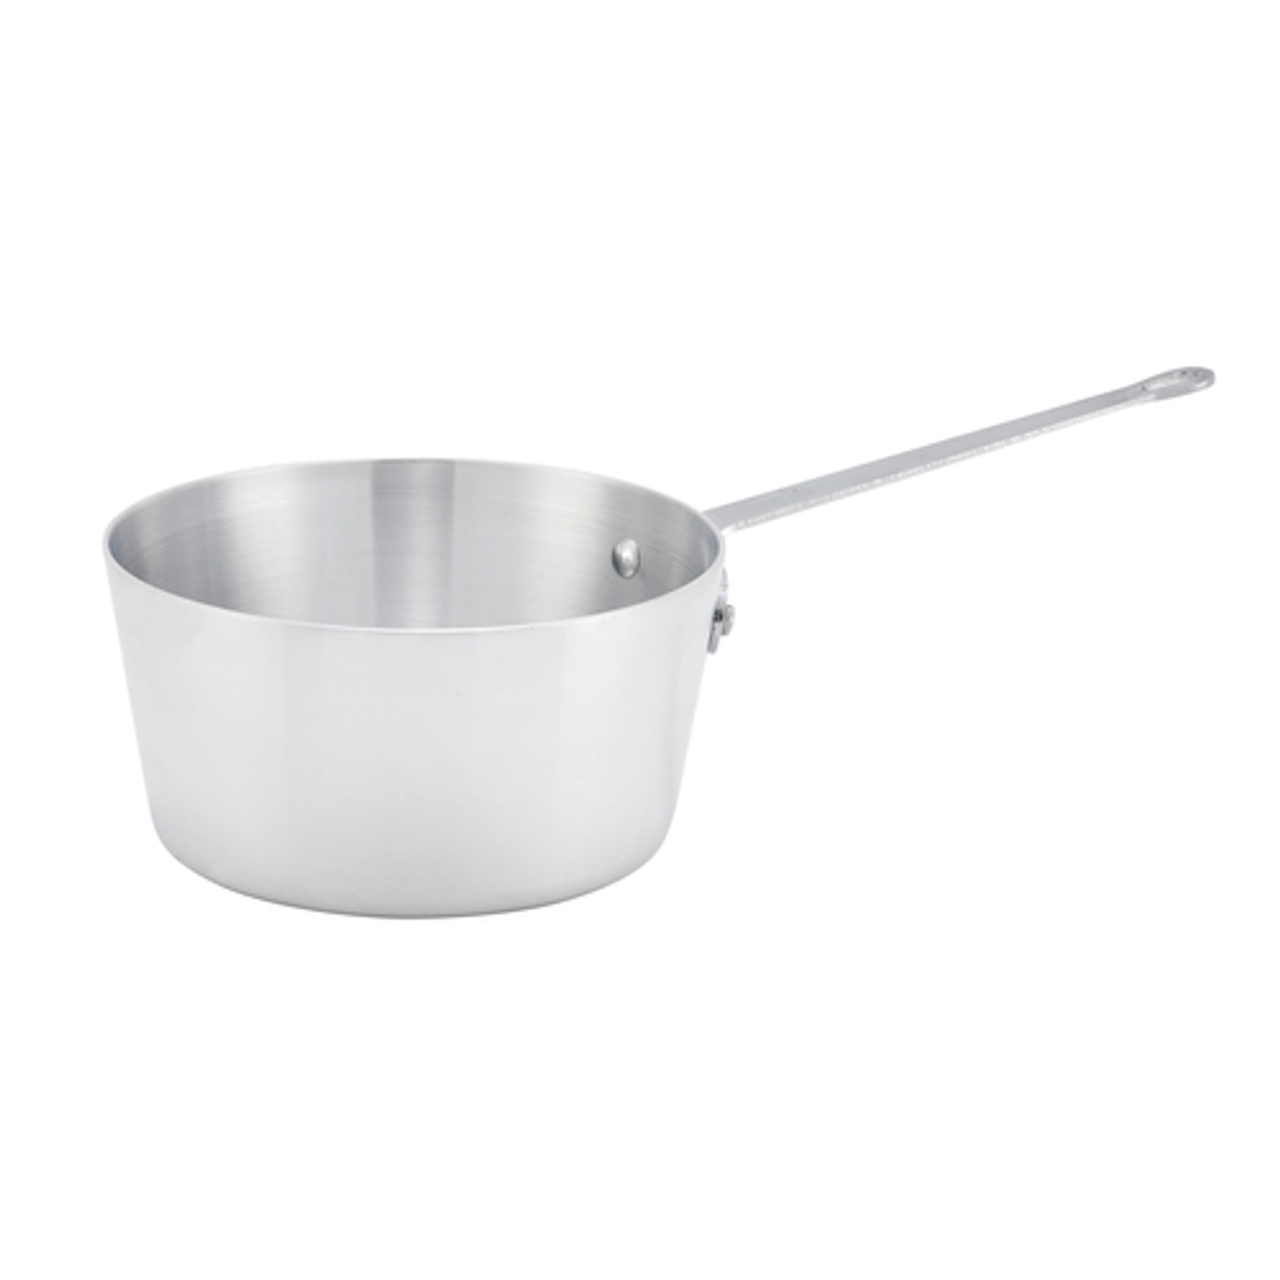 Sauce Pan, 1-1/2 qt., 5-3/4" dia. x 3-5/8"H, flared sides, without cover, riveted handle, 3.0mm thick, 3003 heavyweight aluminum, natural finish, NSF